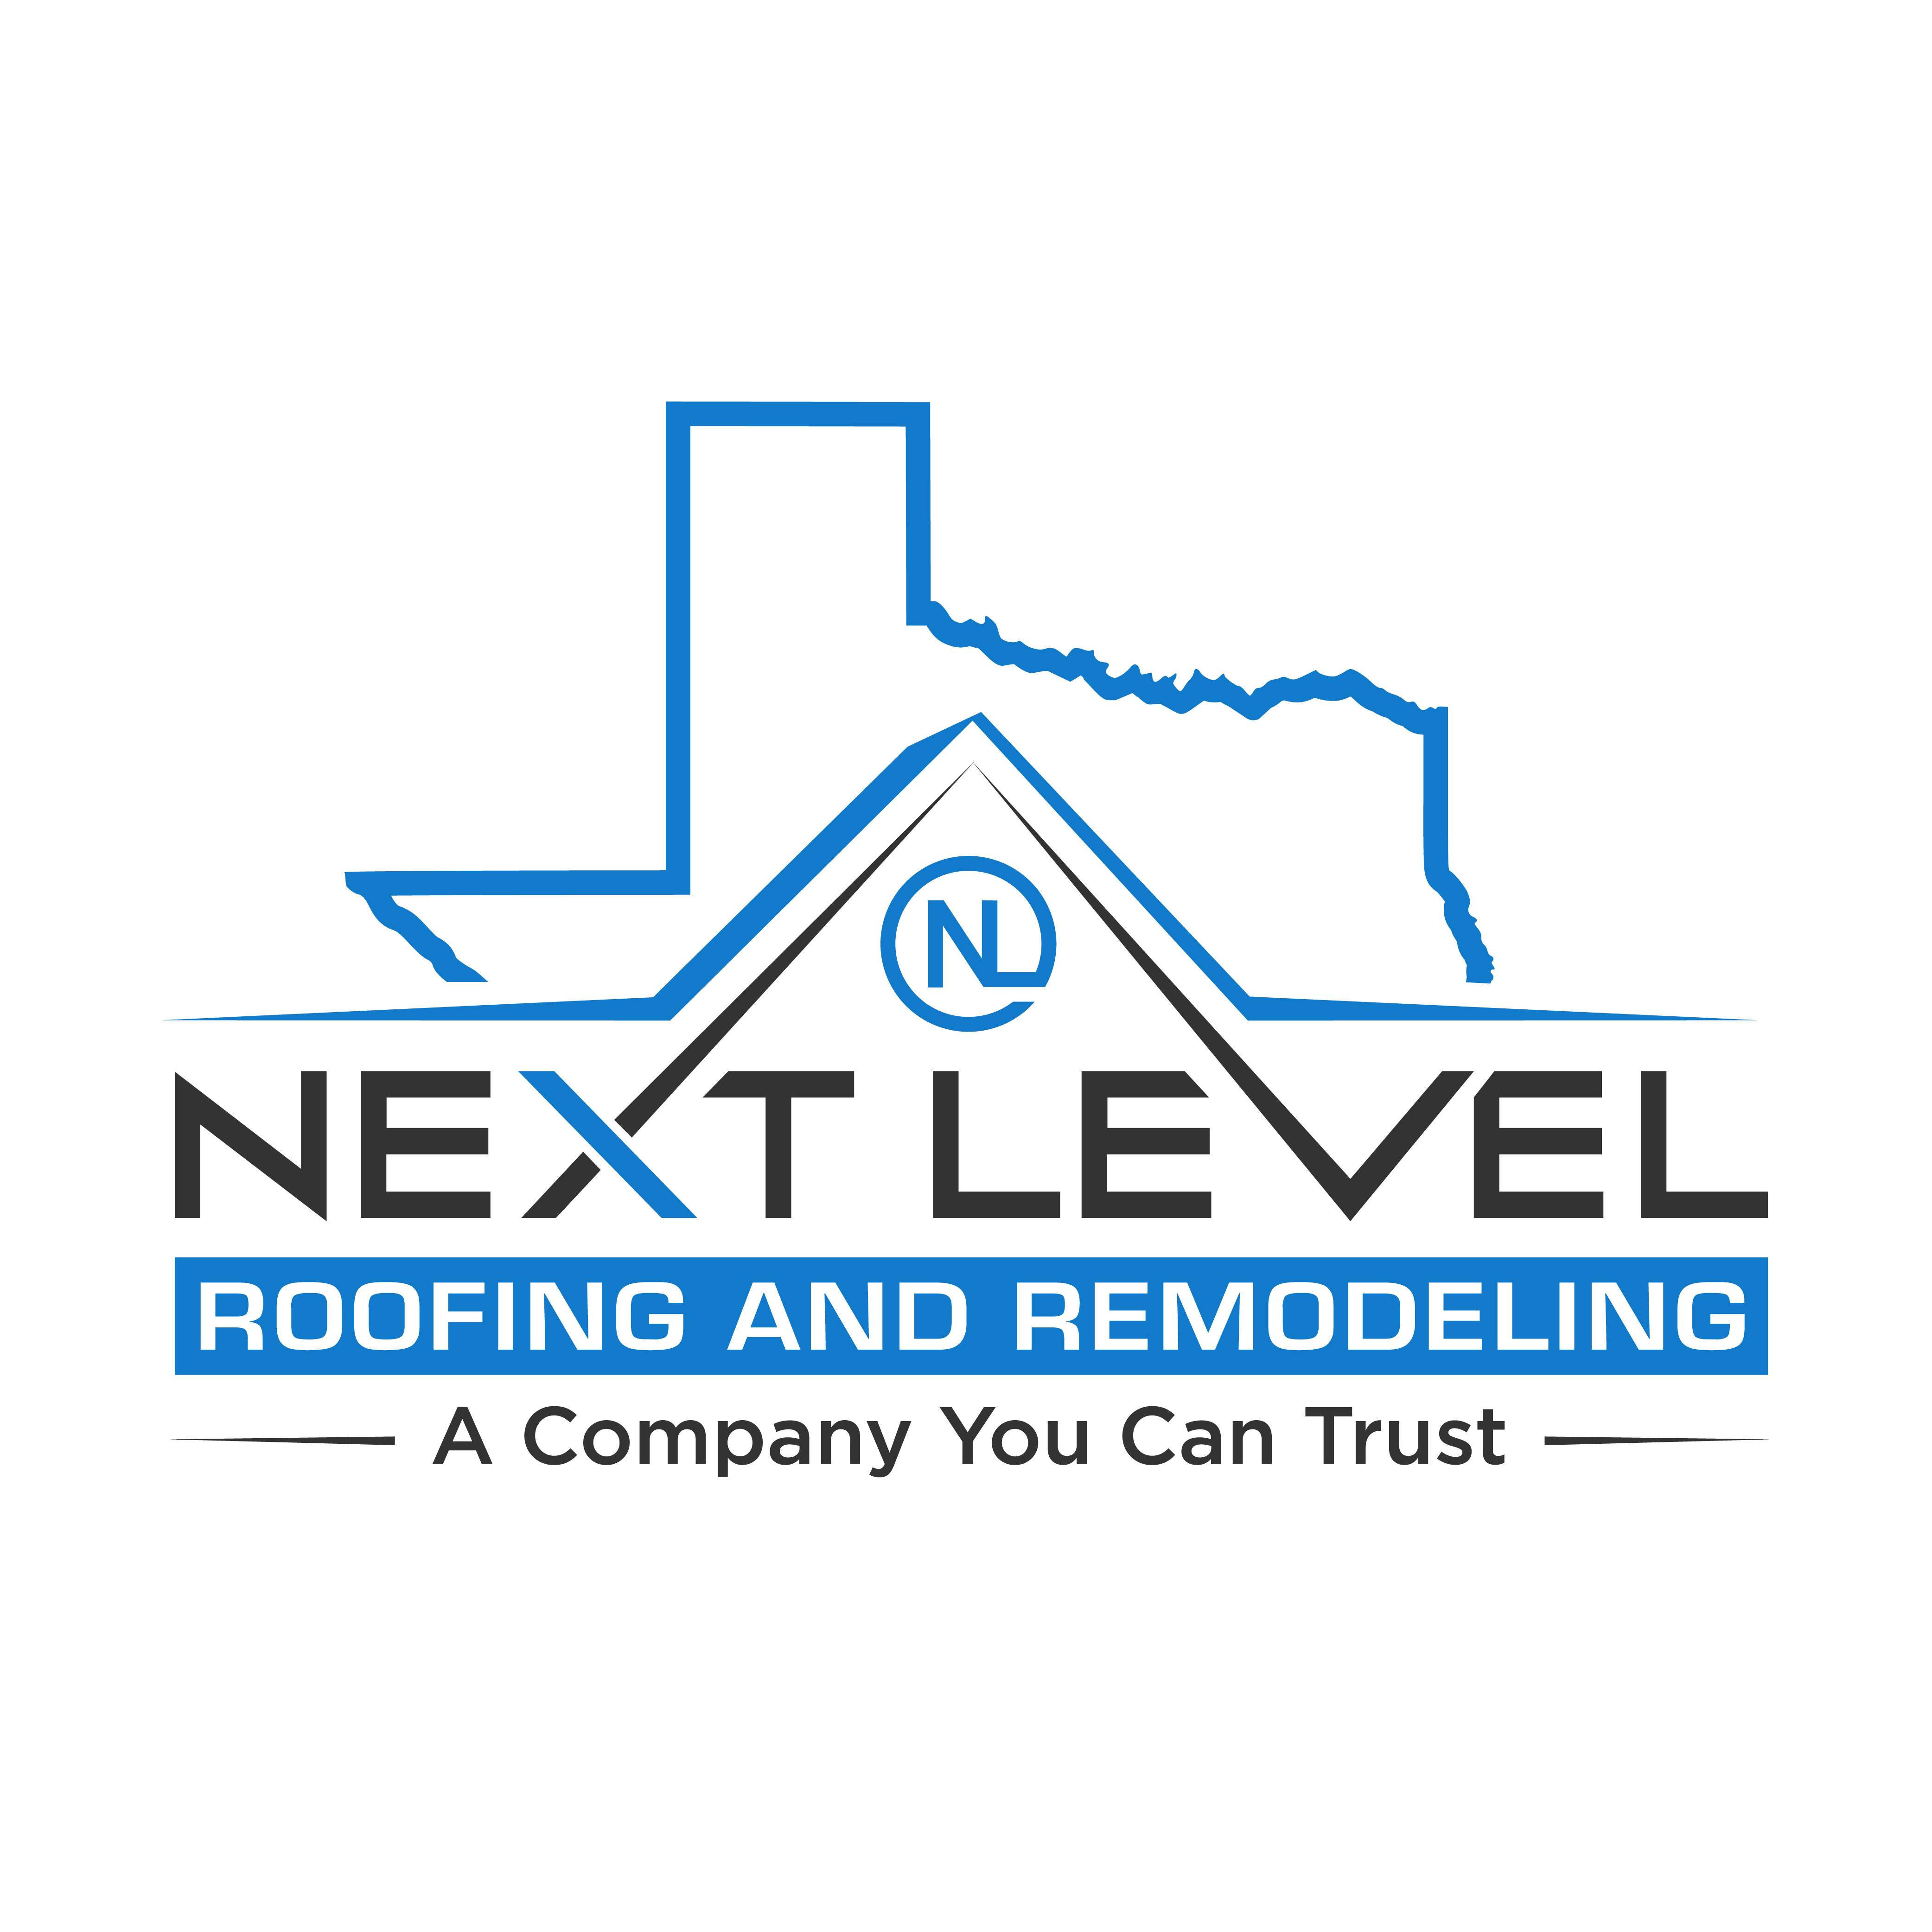 Next Level Roofing & Remodeling | A Company You Can Trust